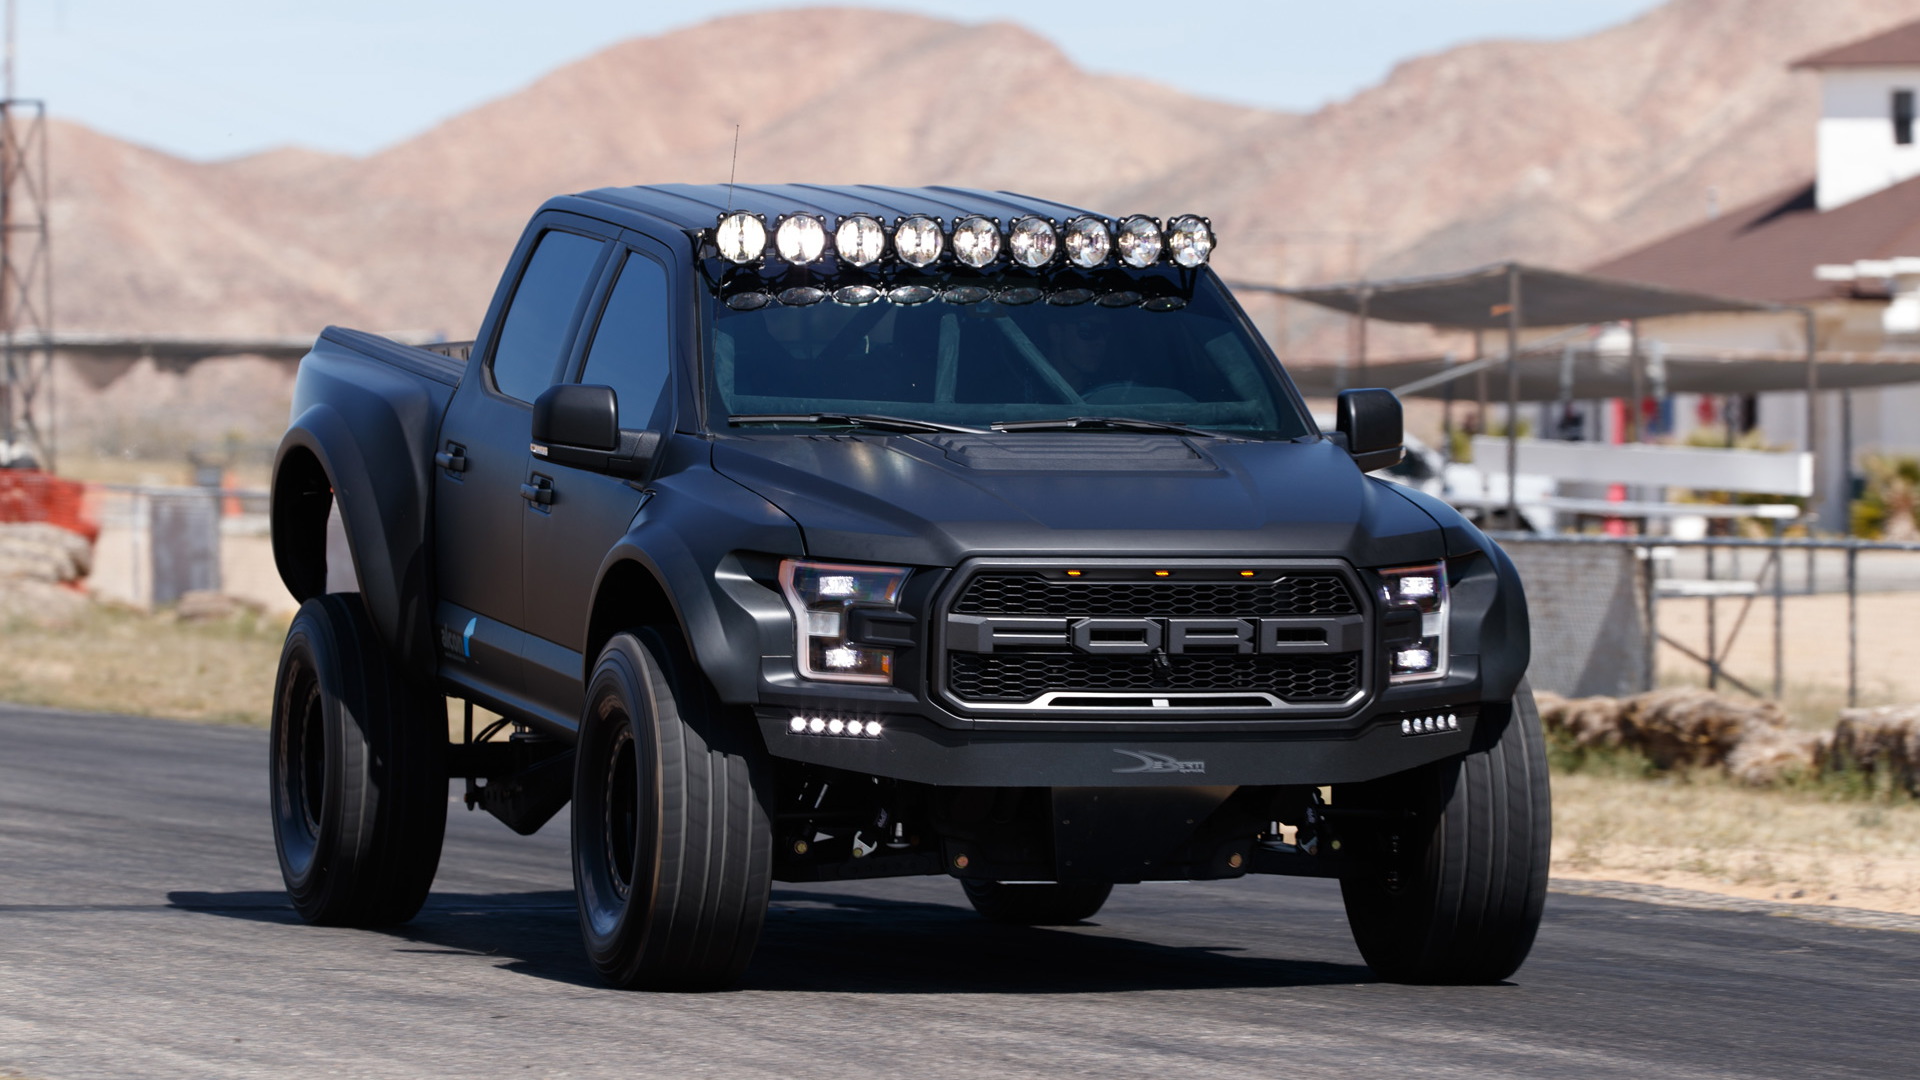 2017 Ford F-150 Raptor equipped with Alcon brake upgrade